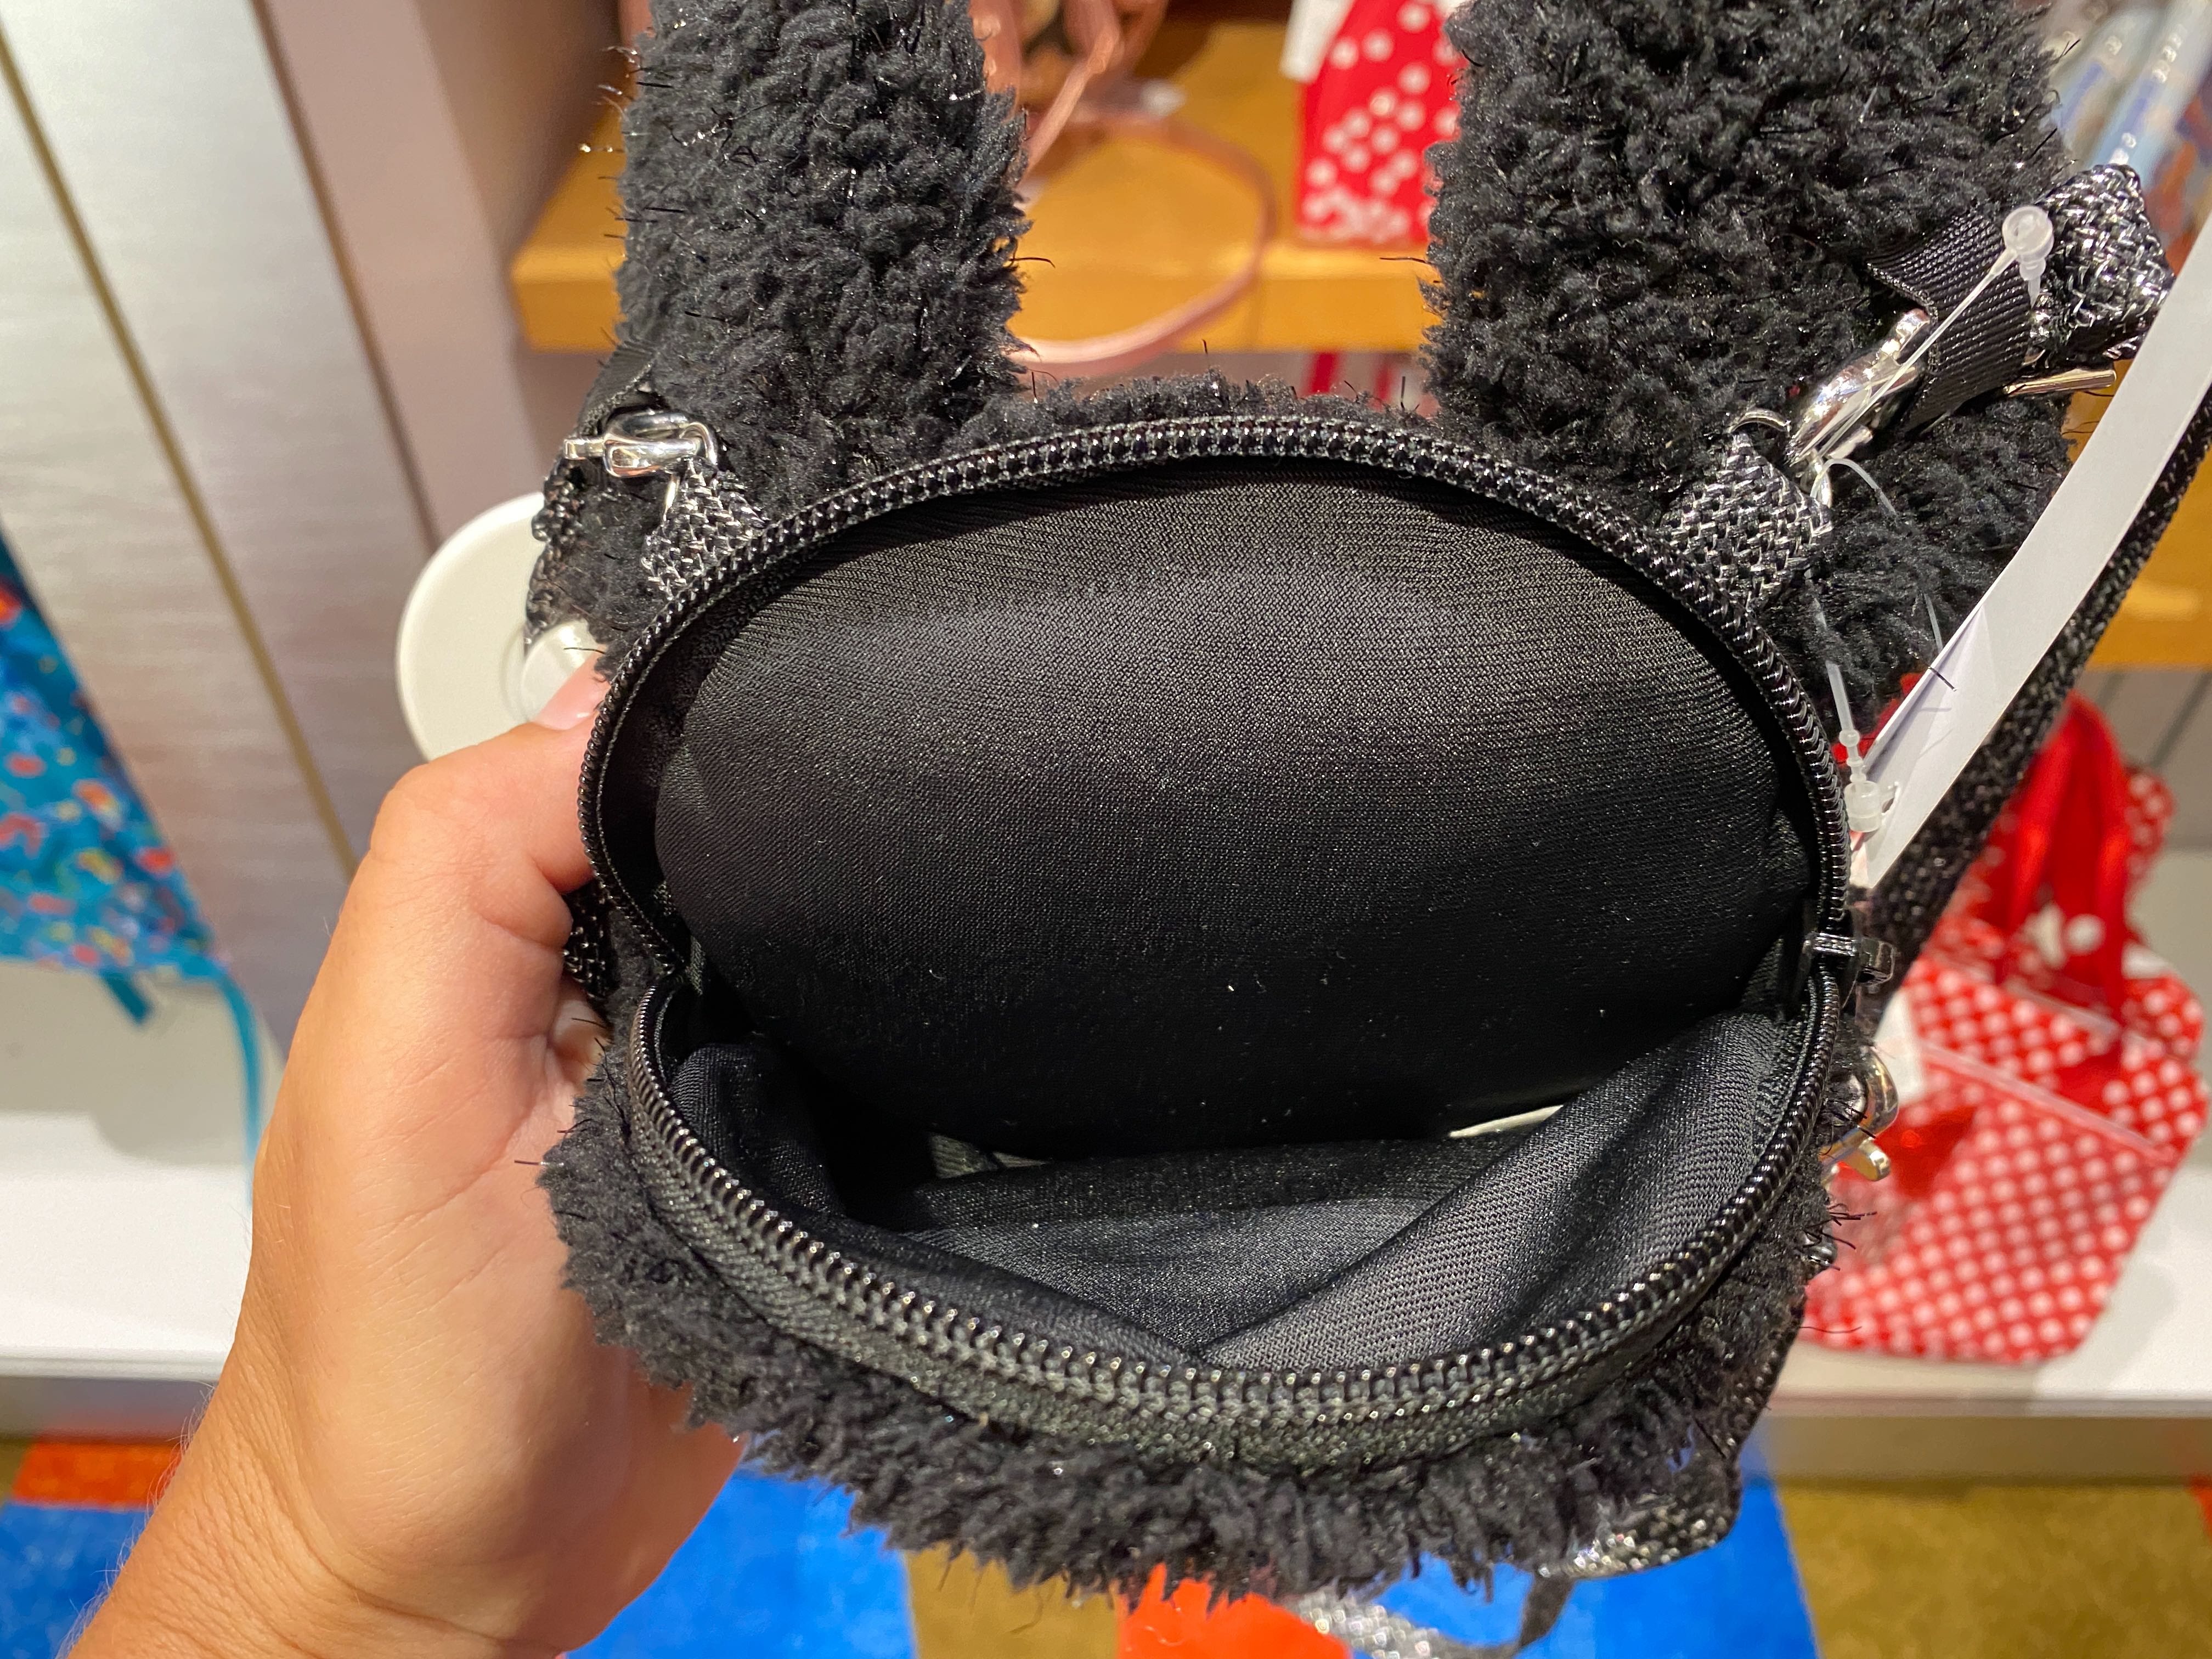 PHOTOS: Snuggle Up With These NEW Mickey & Minnie Mouse Plush